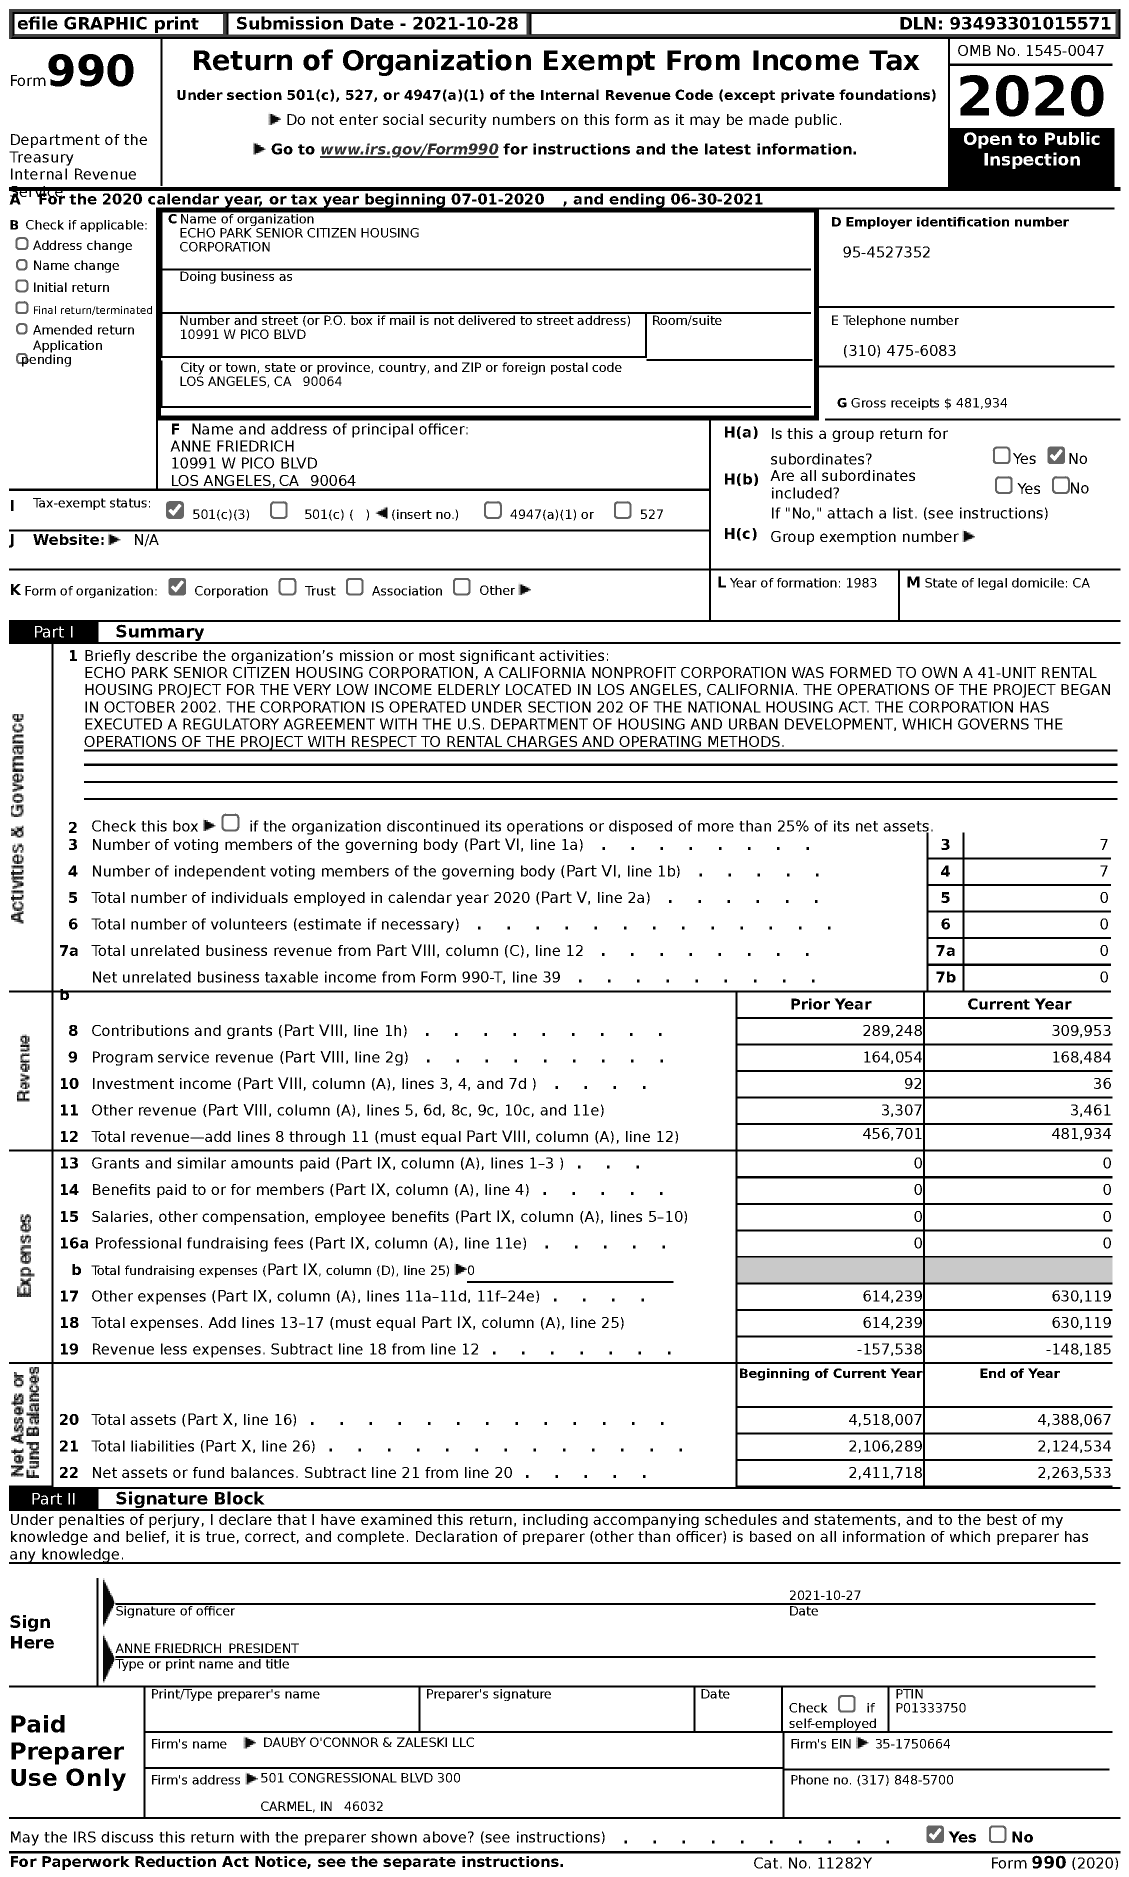 Image of first page of 2020 Form 990 for Echo Park Senior Citizen Housing Corporation